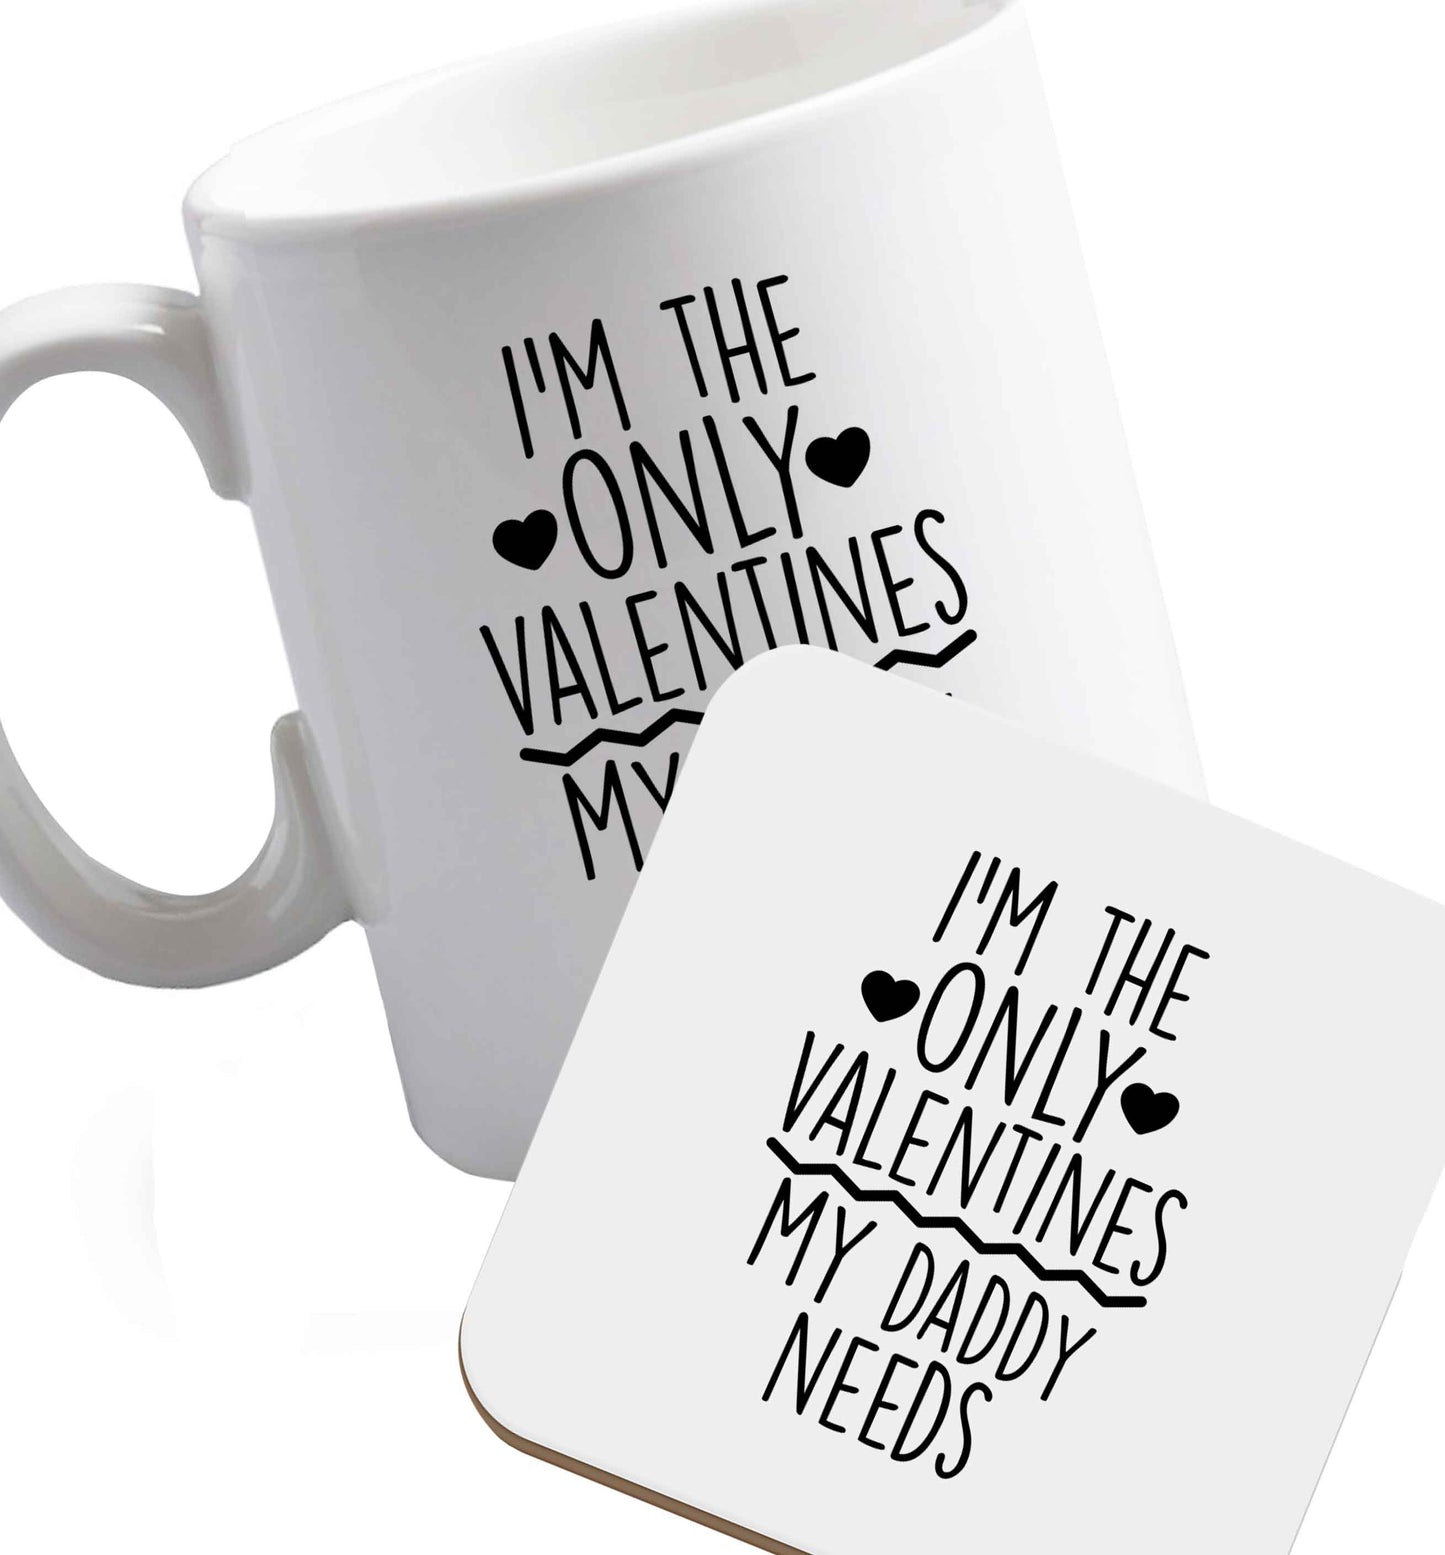 10 oz I'm the only valentines my daddy needs ceramic mug and coaster set right handed